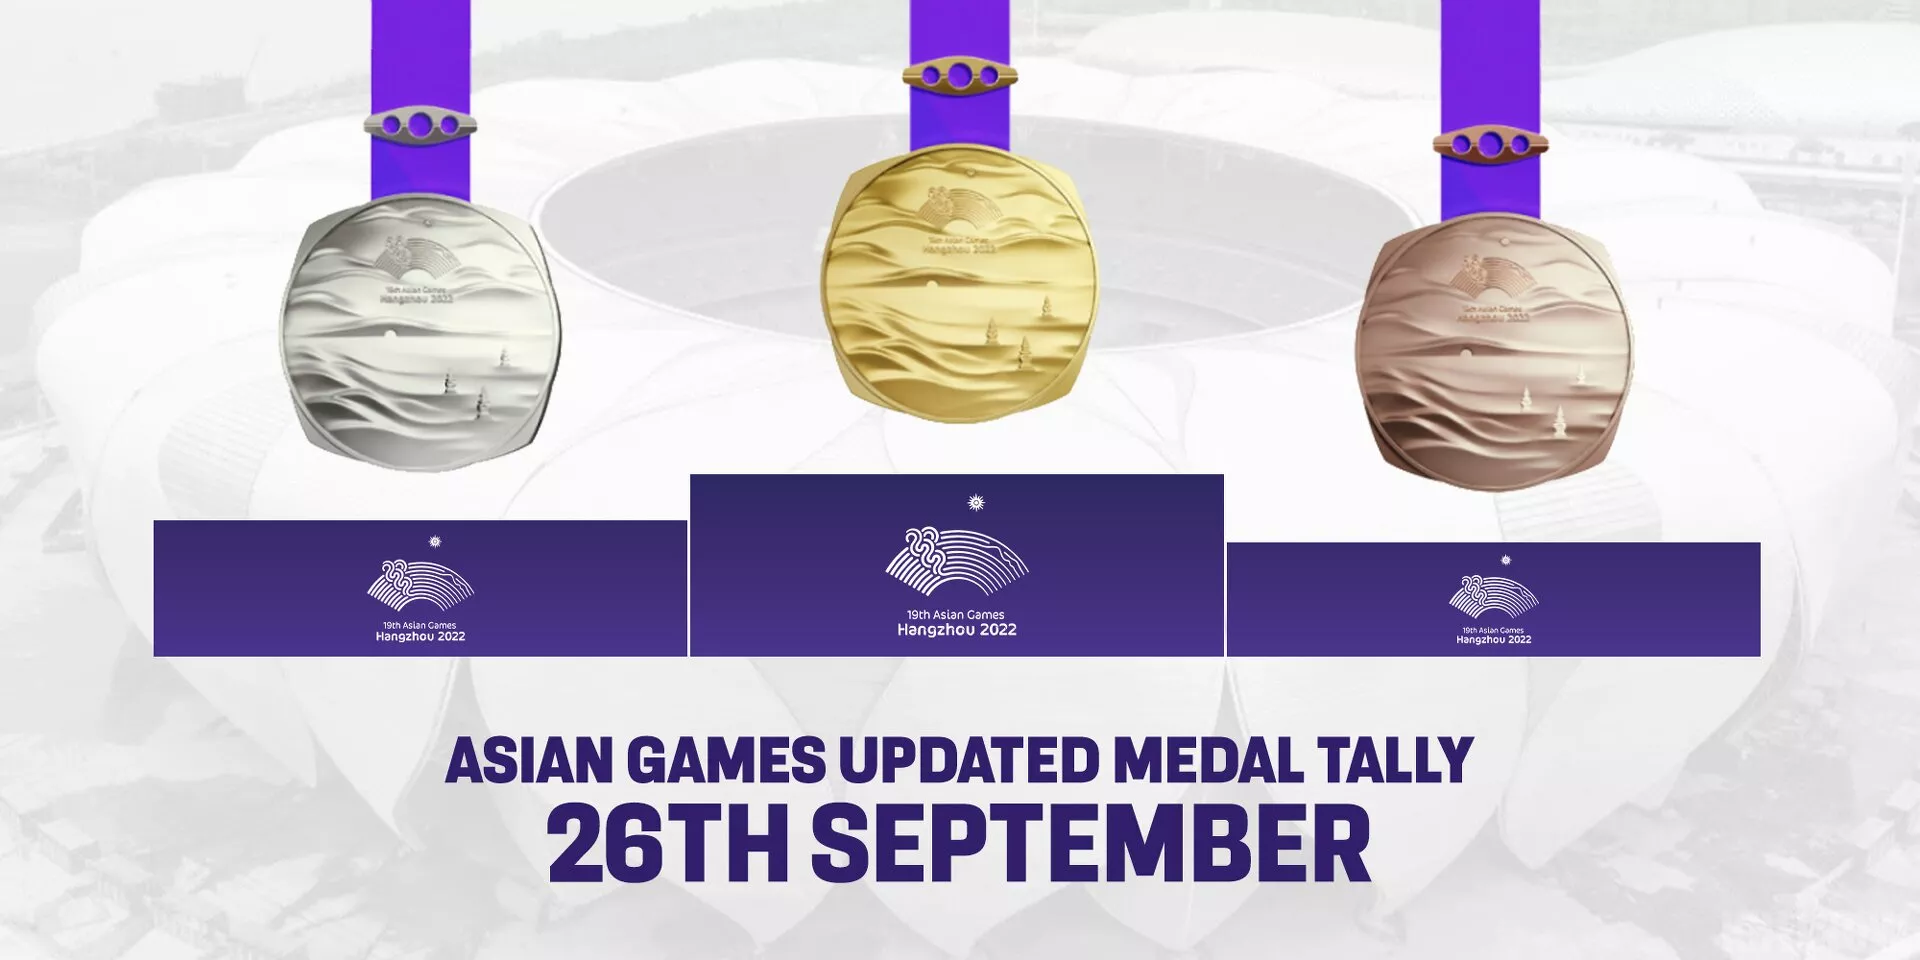 Asian Games 2023: Updated medal tally after Day 3, 26th September